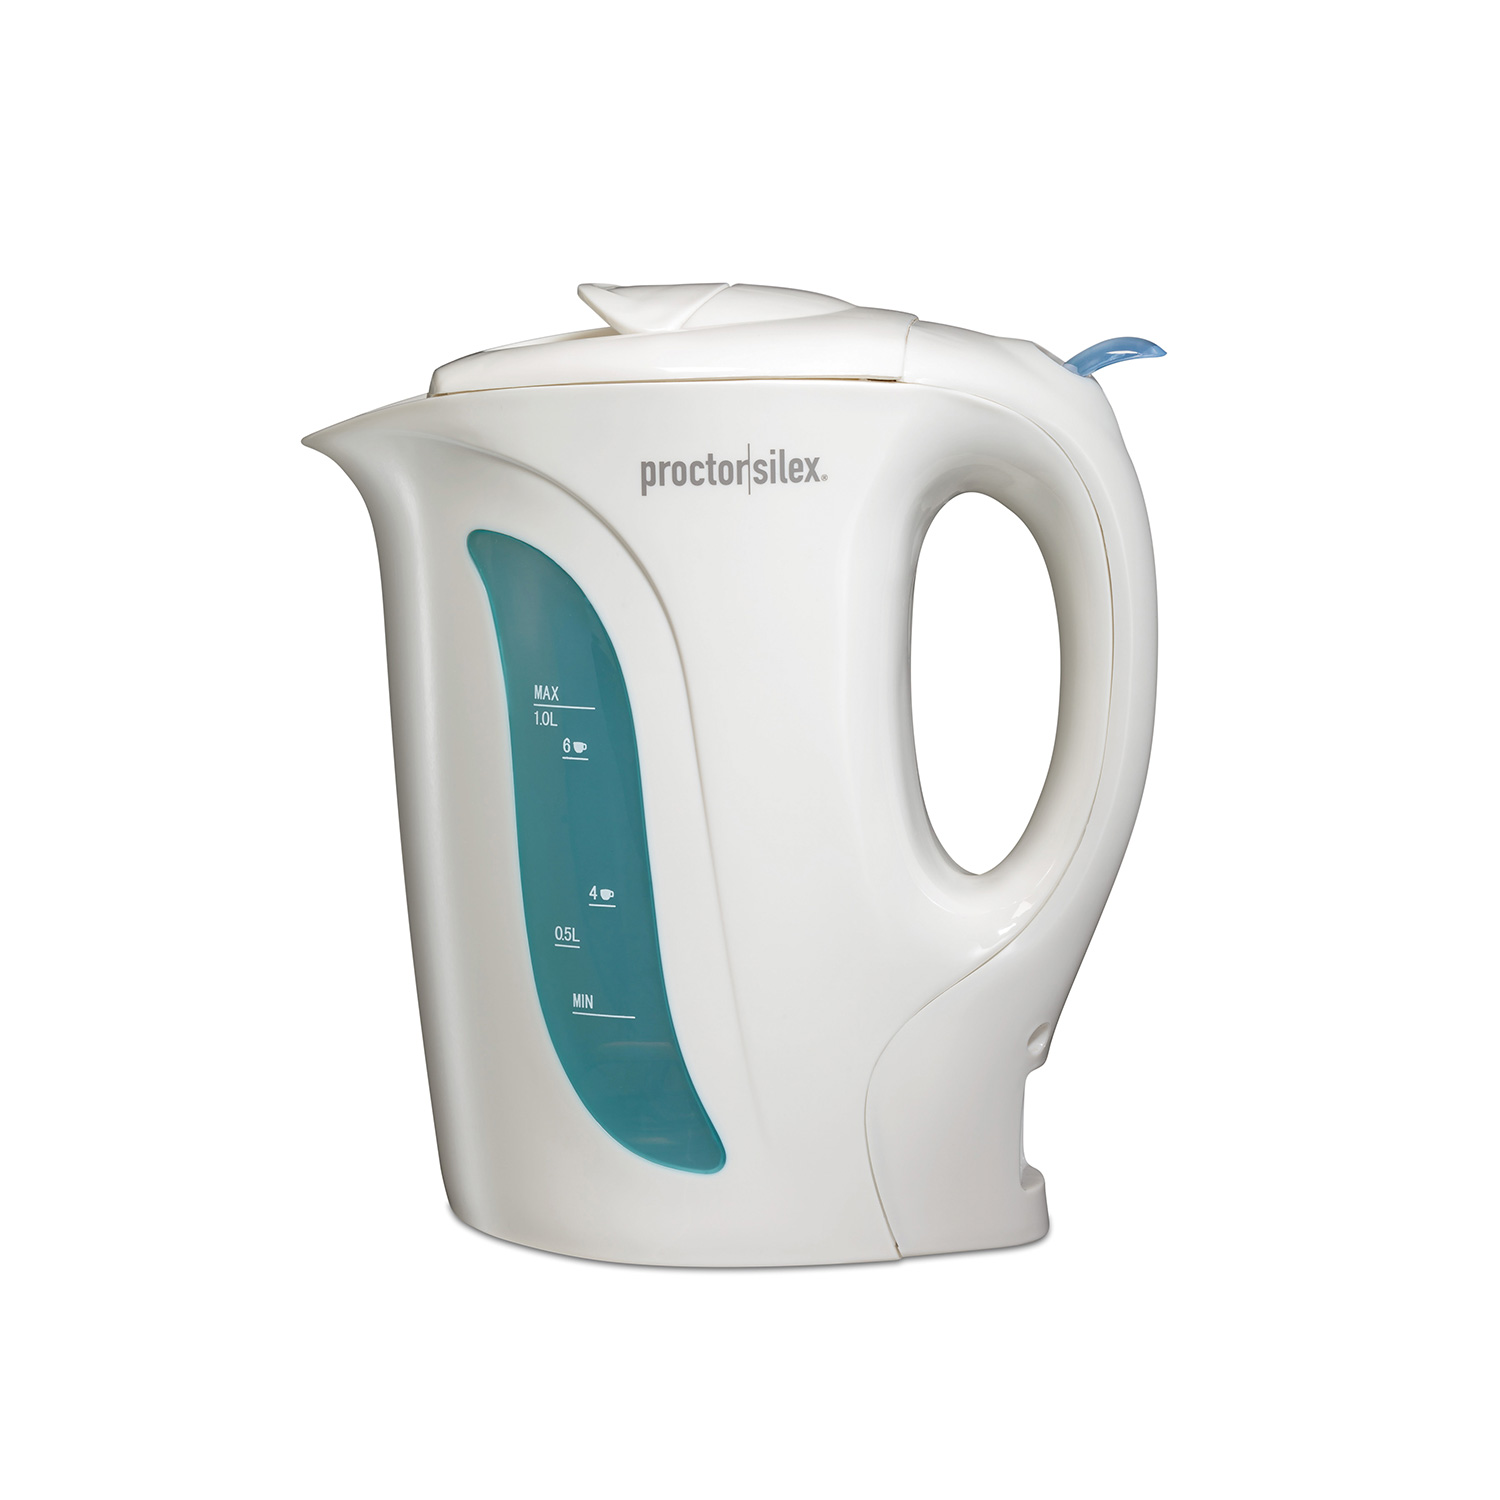 1 Liter Electric Kettle with Boil-Dry Protection - K2070PS Small Size